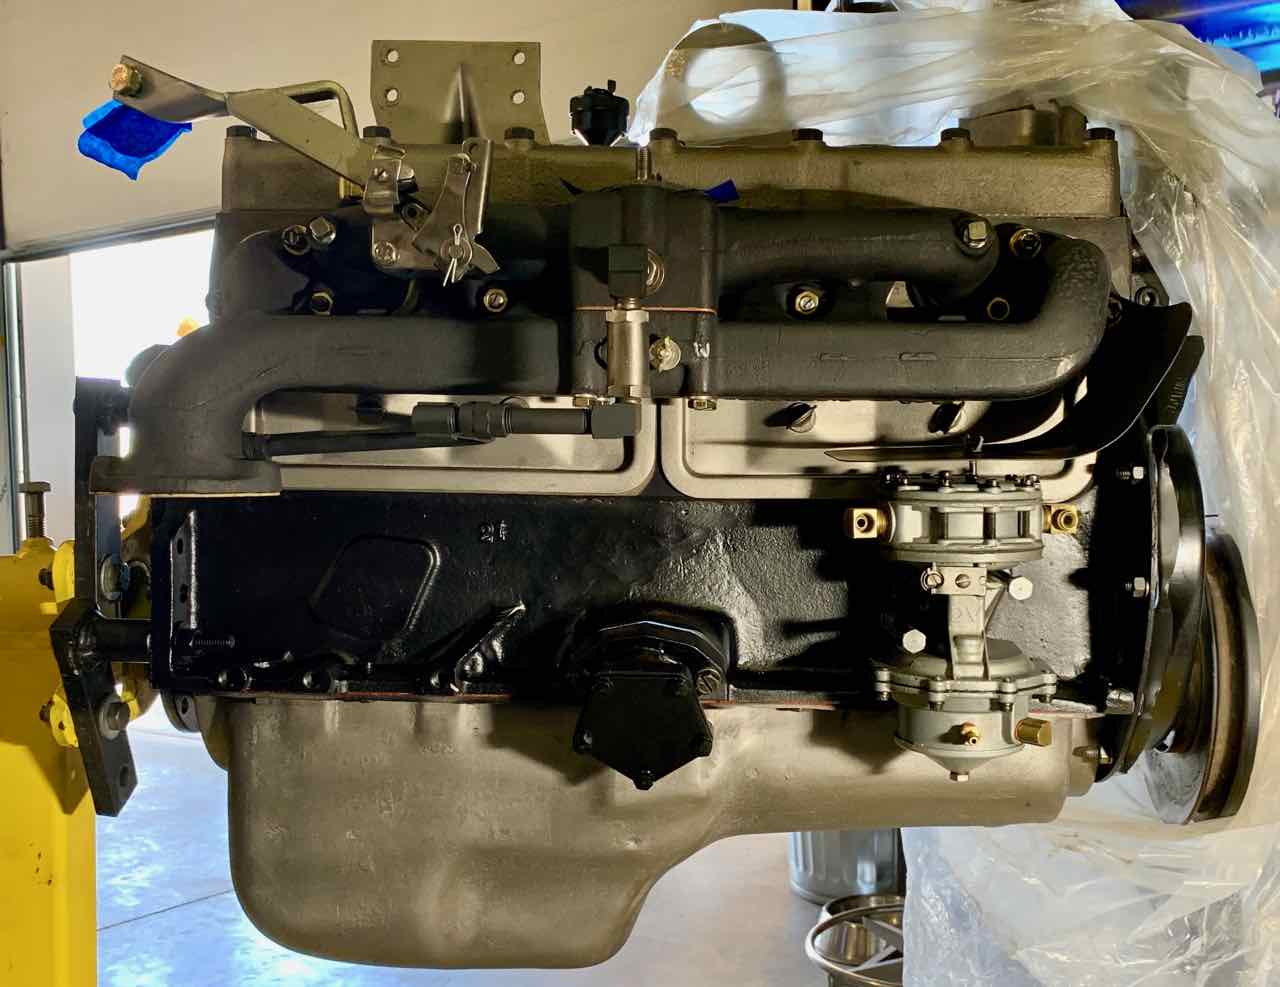 230 engine with PVC and manifolds bolted up (1).jpg